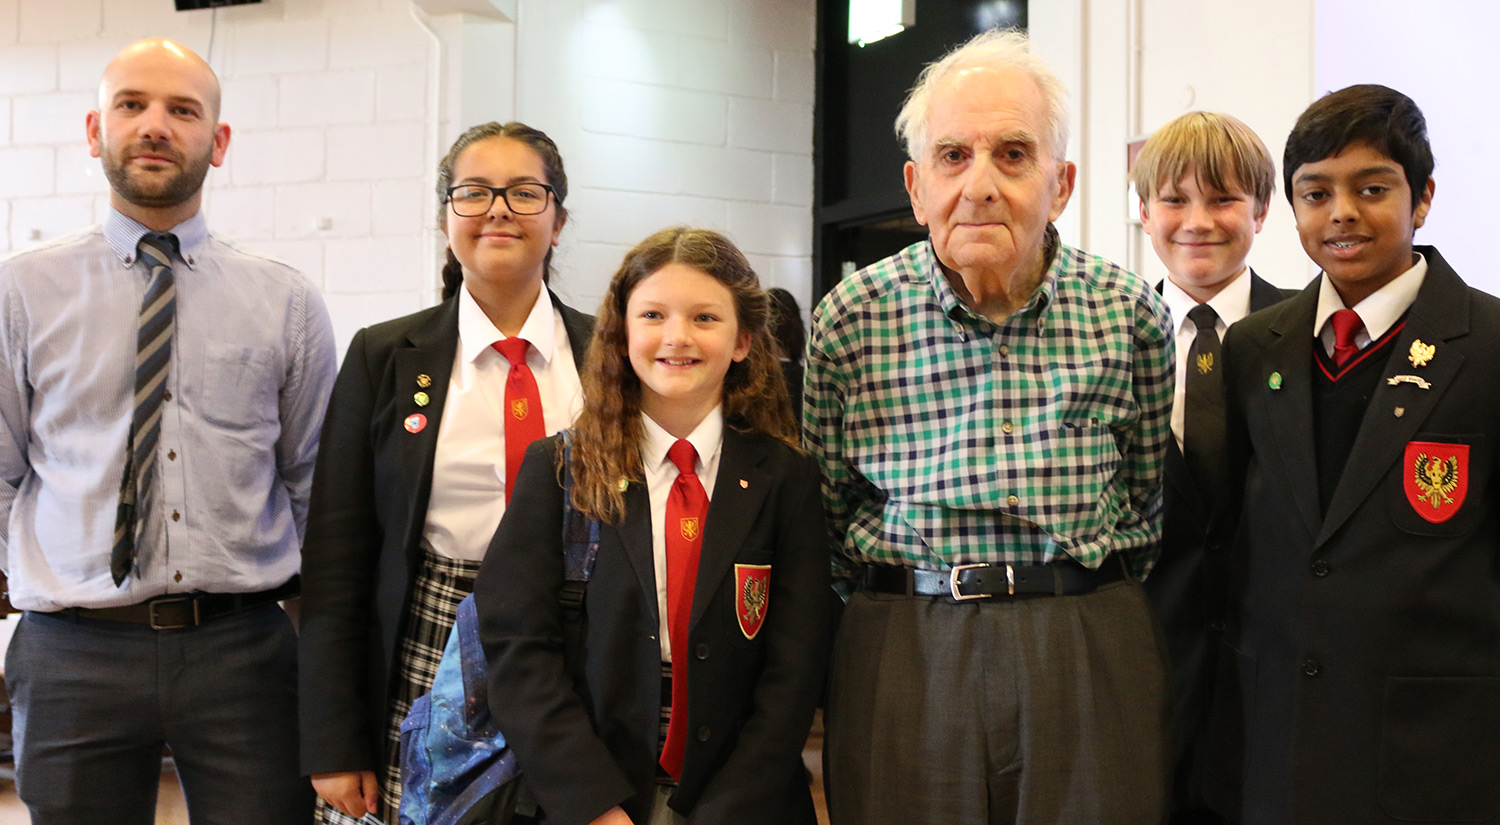 Holocaust survivor Frank Bright with students from The Gilberd School